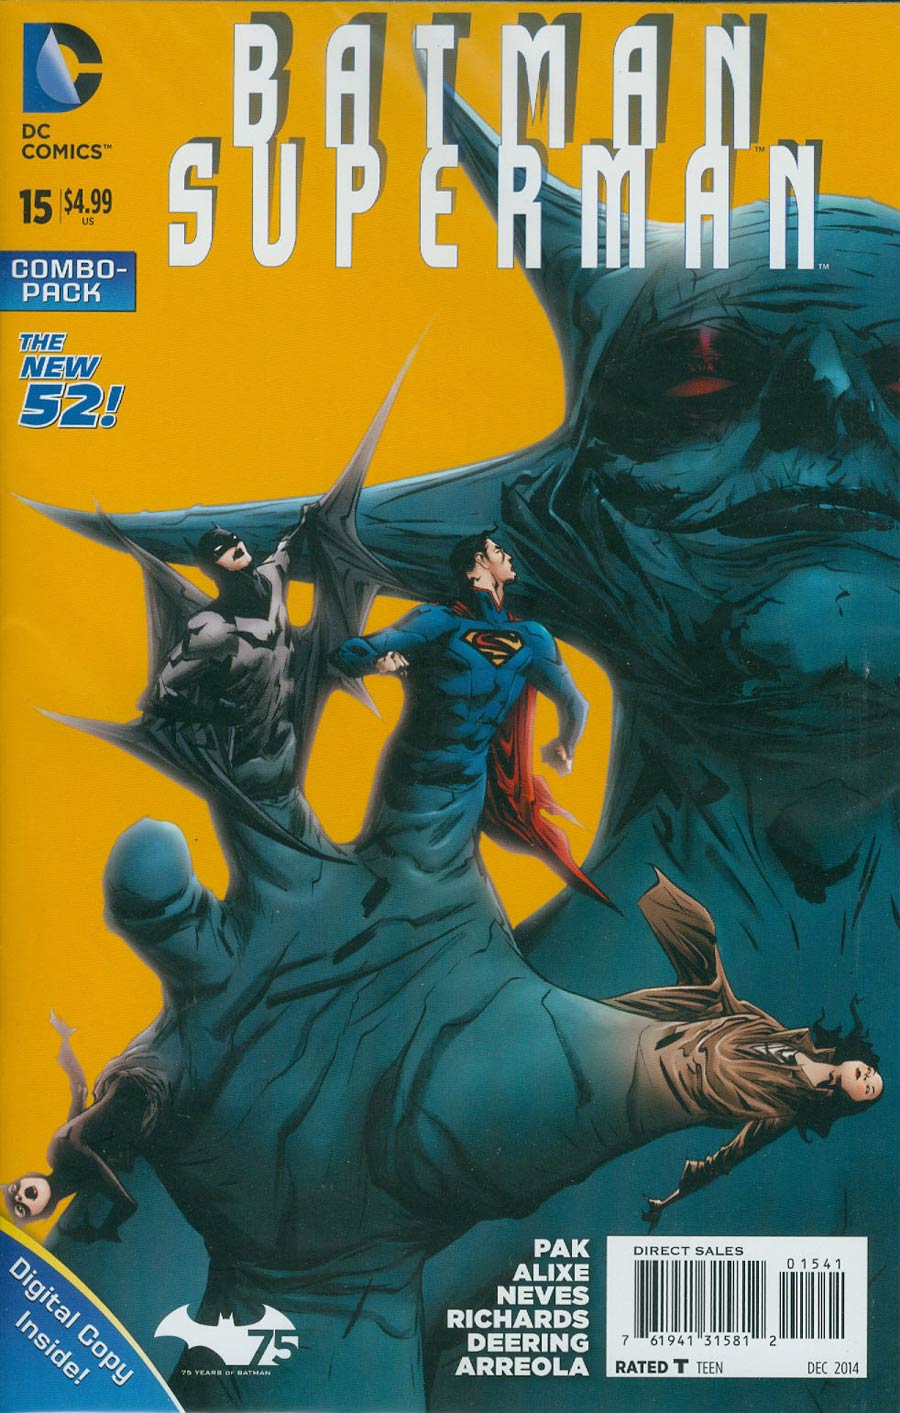 Batman Superman #15 Cover D Combo Pack Without Polybag